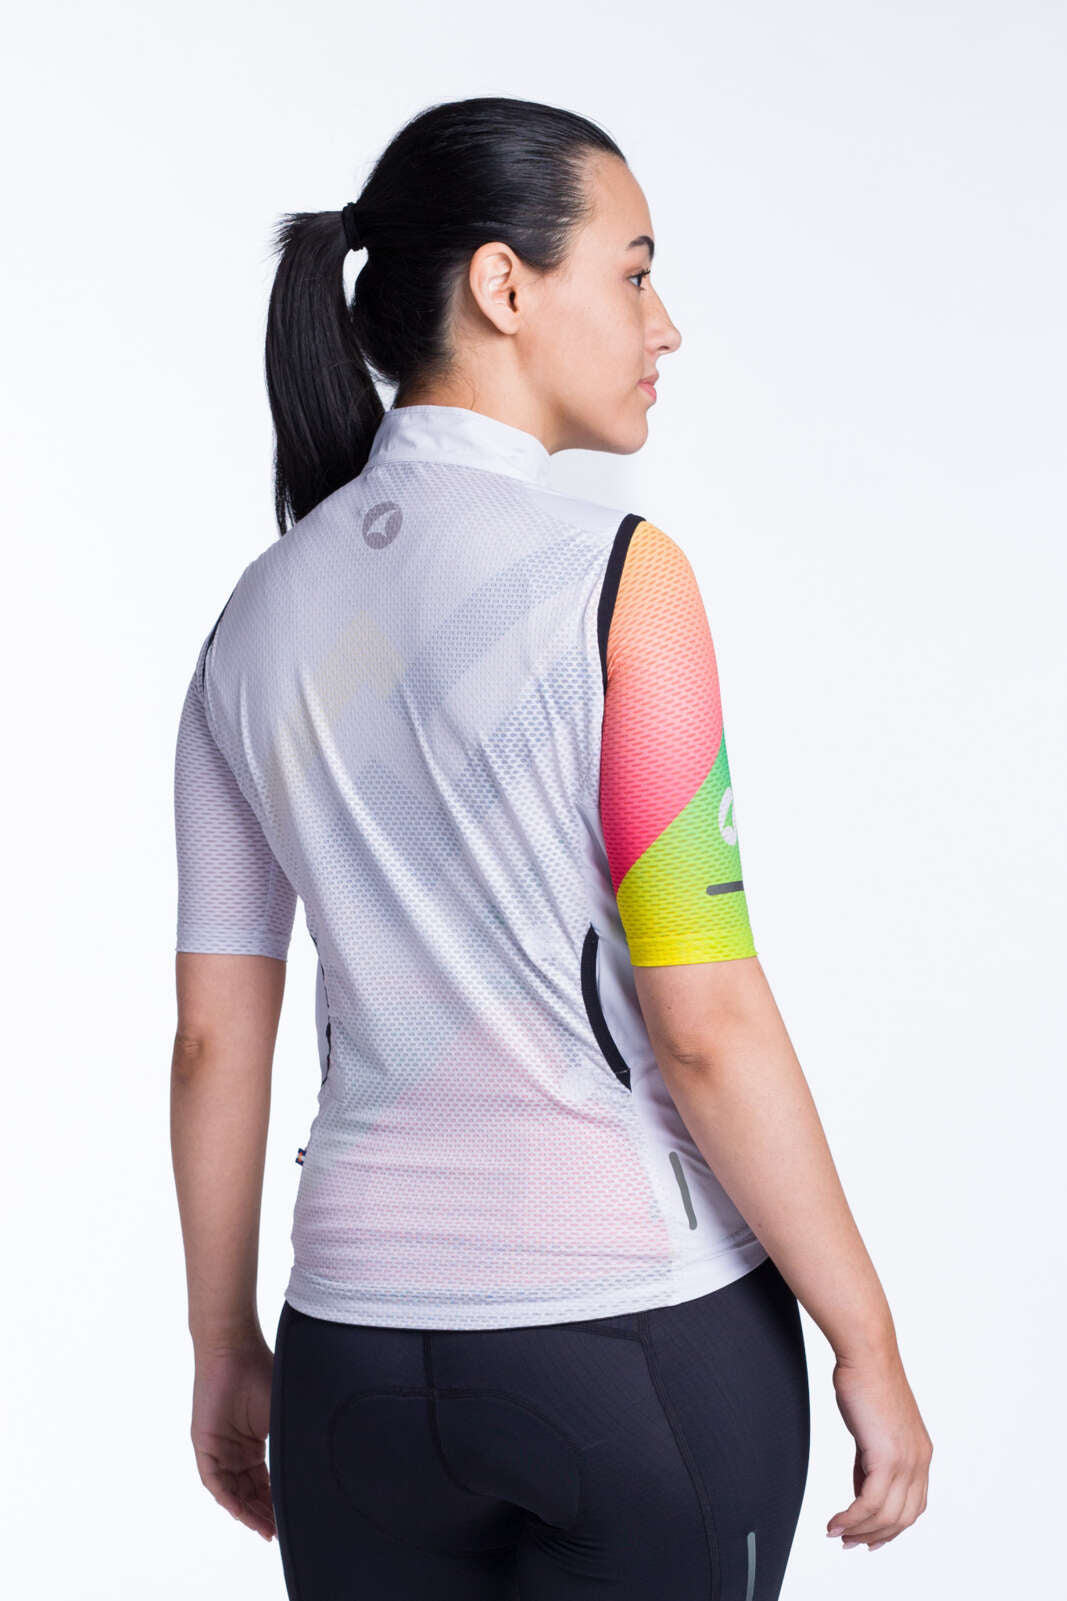 Women's White Packable Cycling Wind Vest - Back View